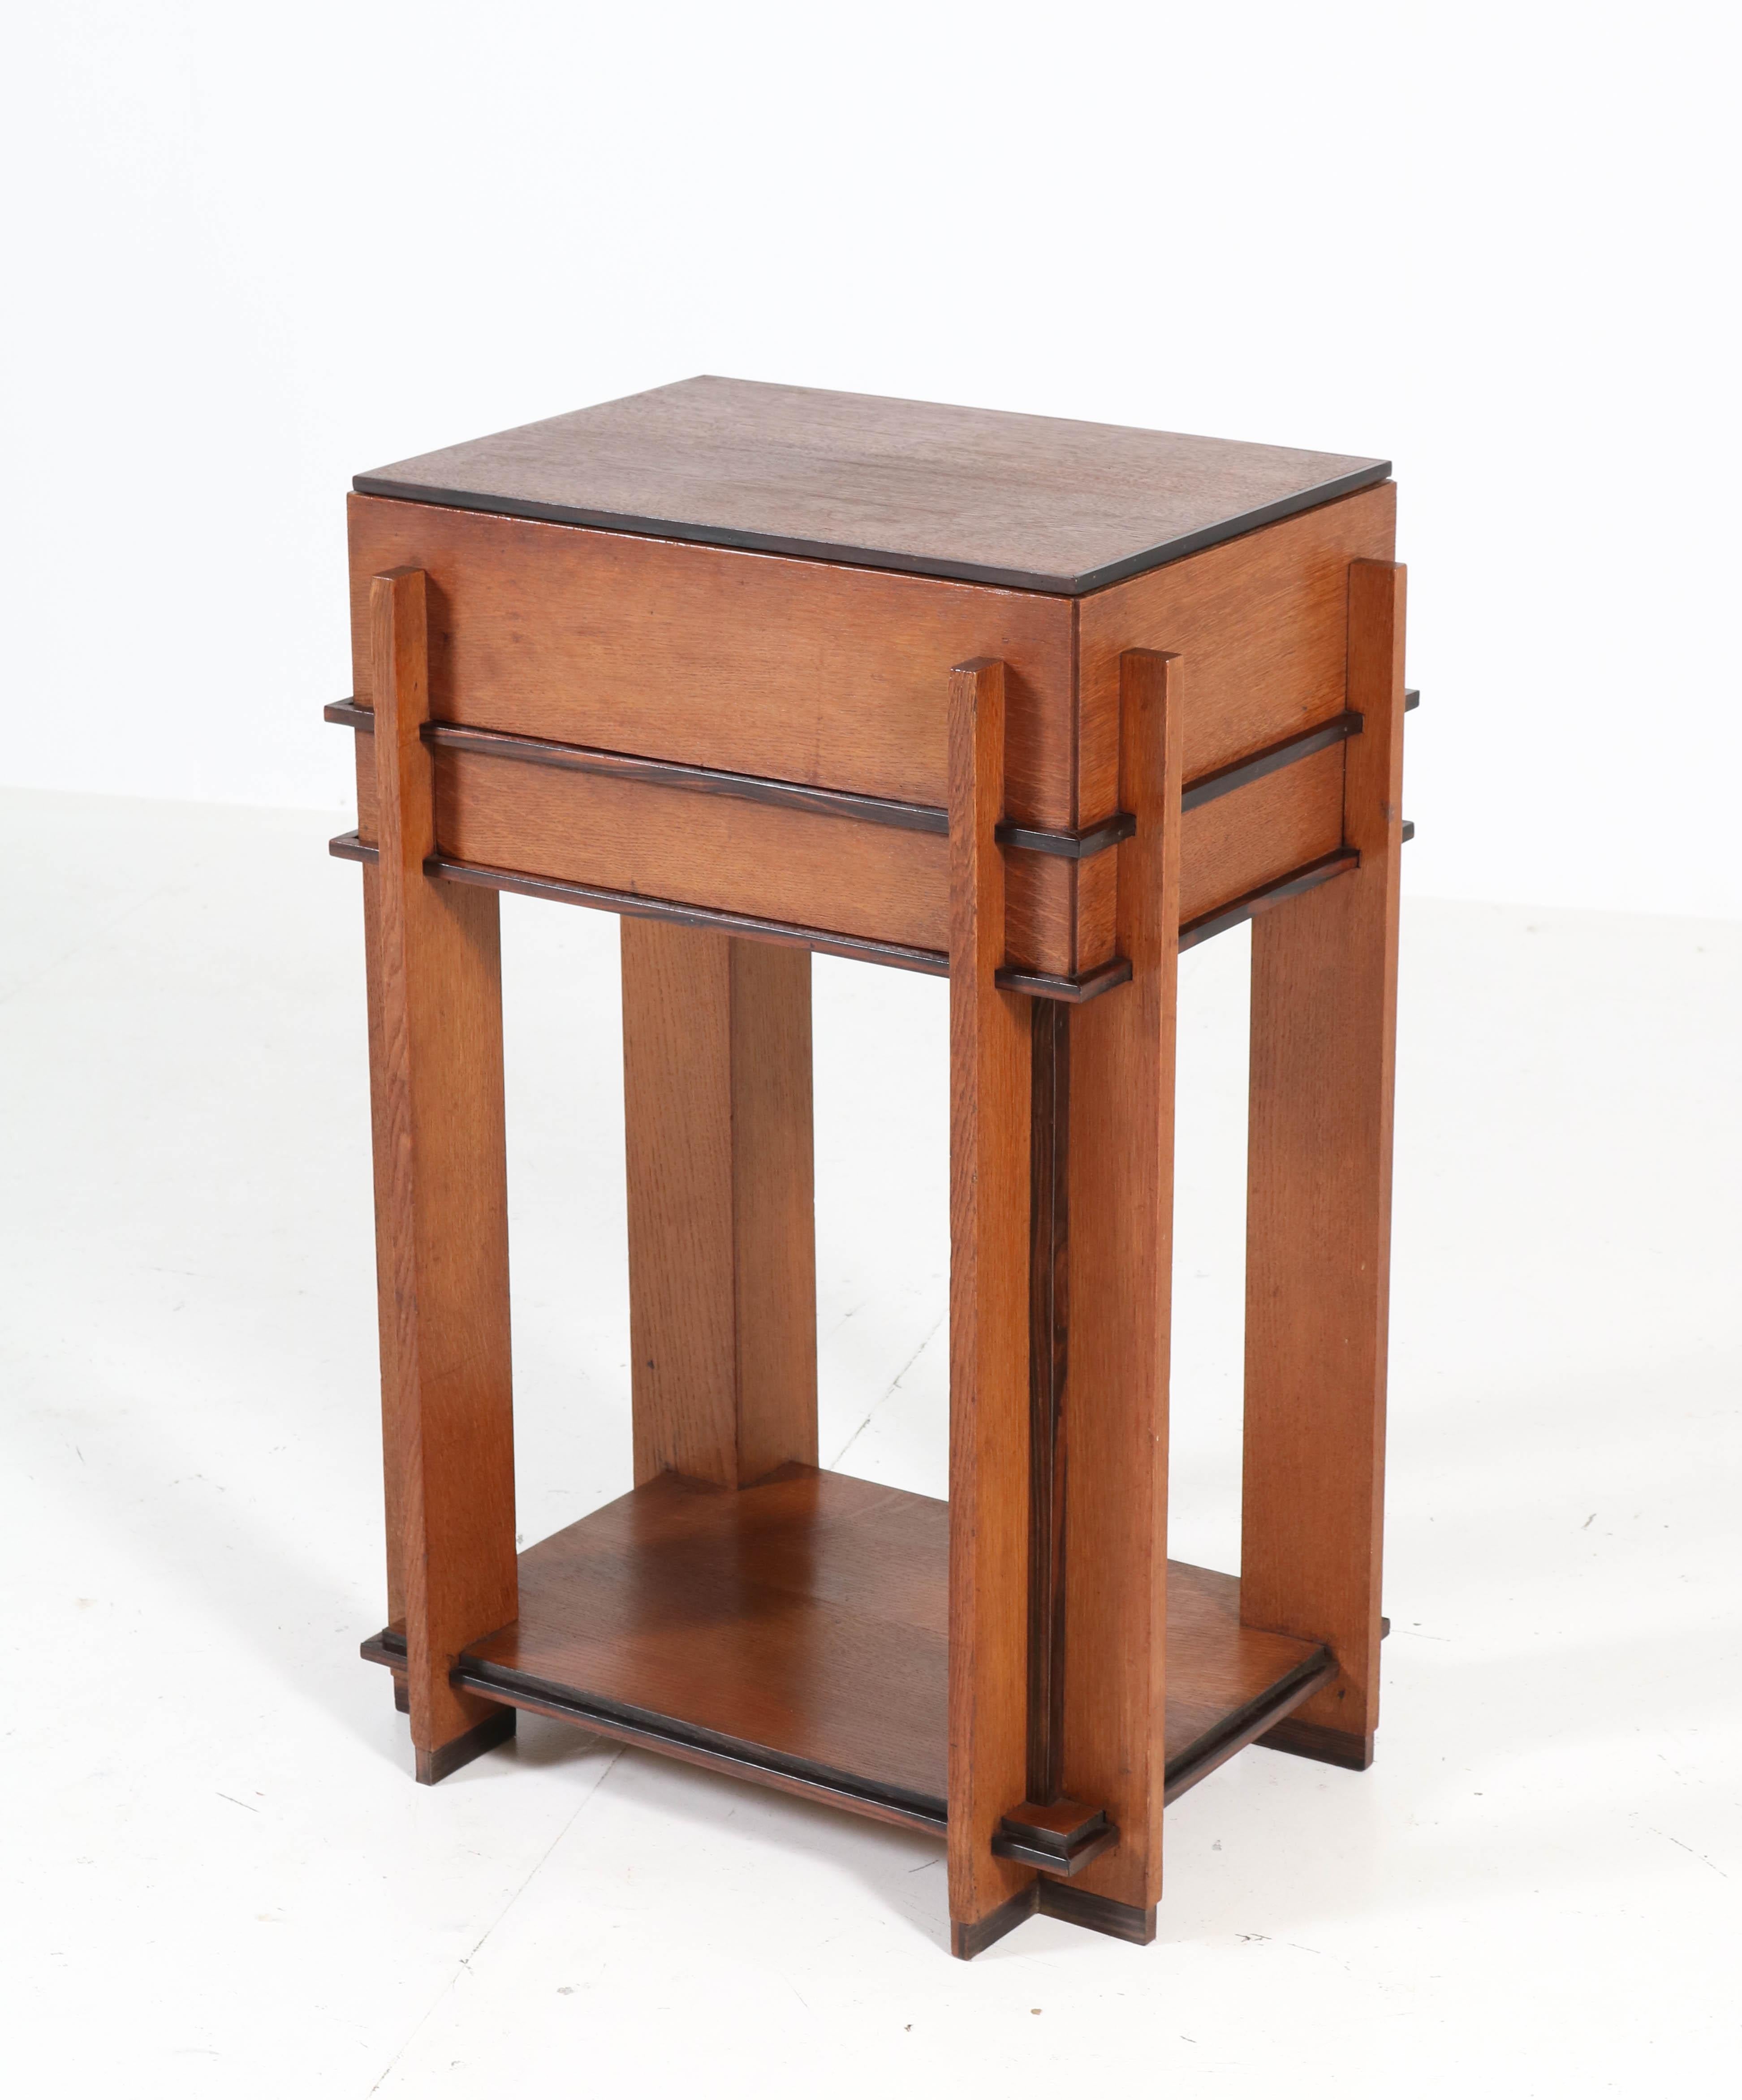 Wonderful and rare Art Deco Haagse school sewing table.
Attributed to J. Roodenburgh, Amsterdam.
Striking Dutch design from the 1920s.
Solid oak with solid Macassar ebony lining.
In very good condition with minor wear consistent with age and